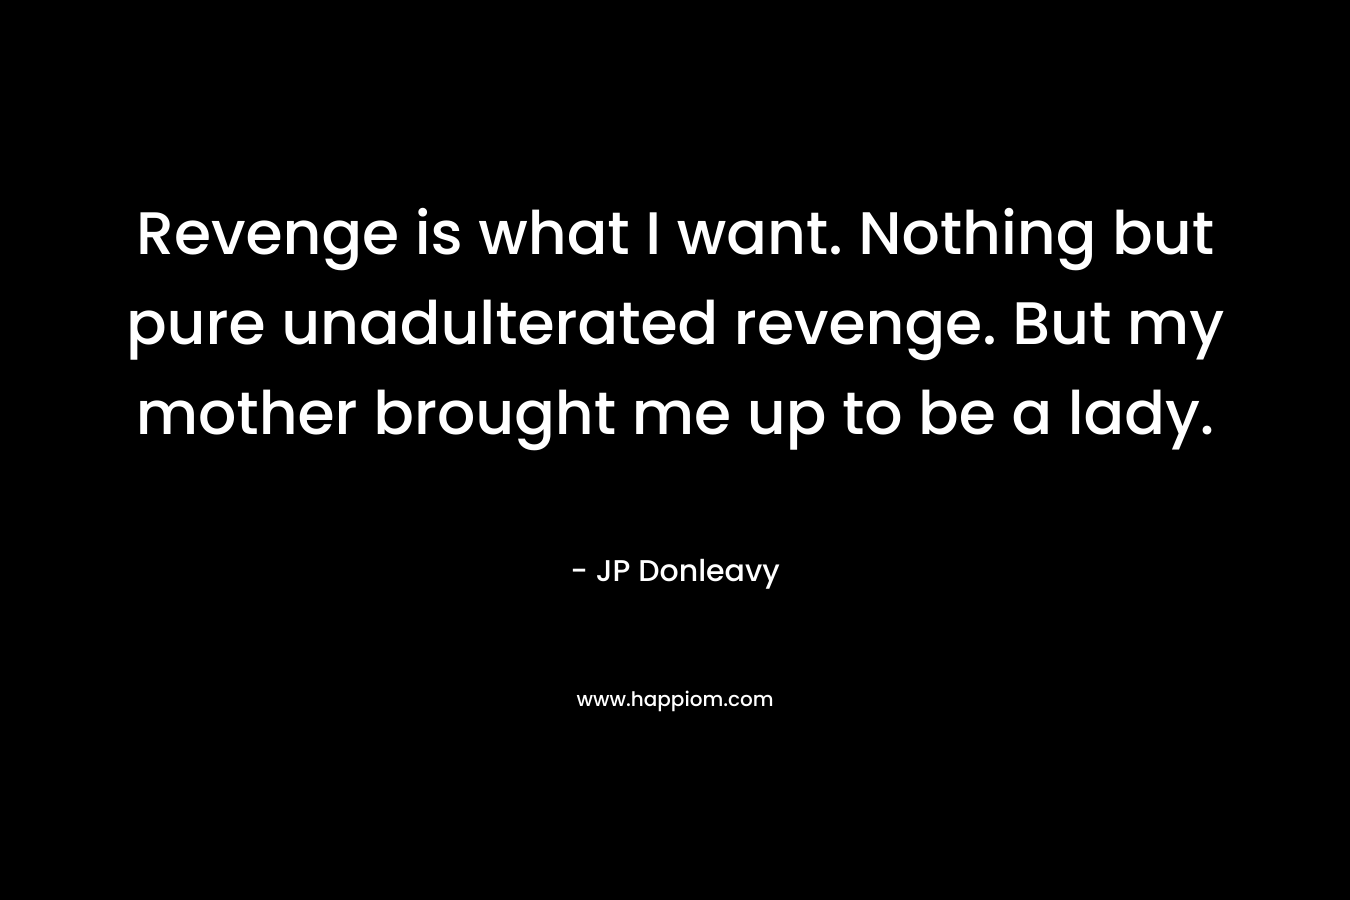 Revenge is what I want. Nothing but pure unadulterated revenge. But my mother brought me up to be a lady.